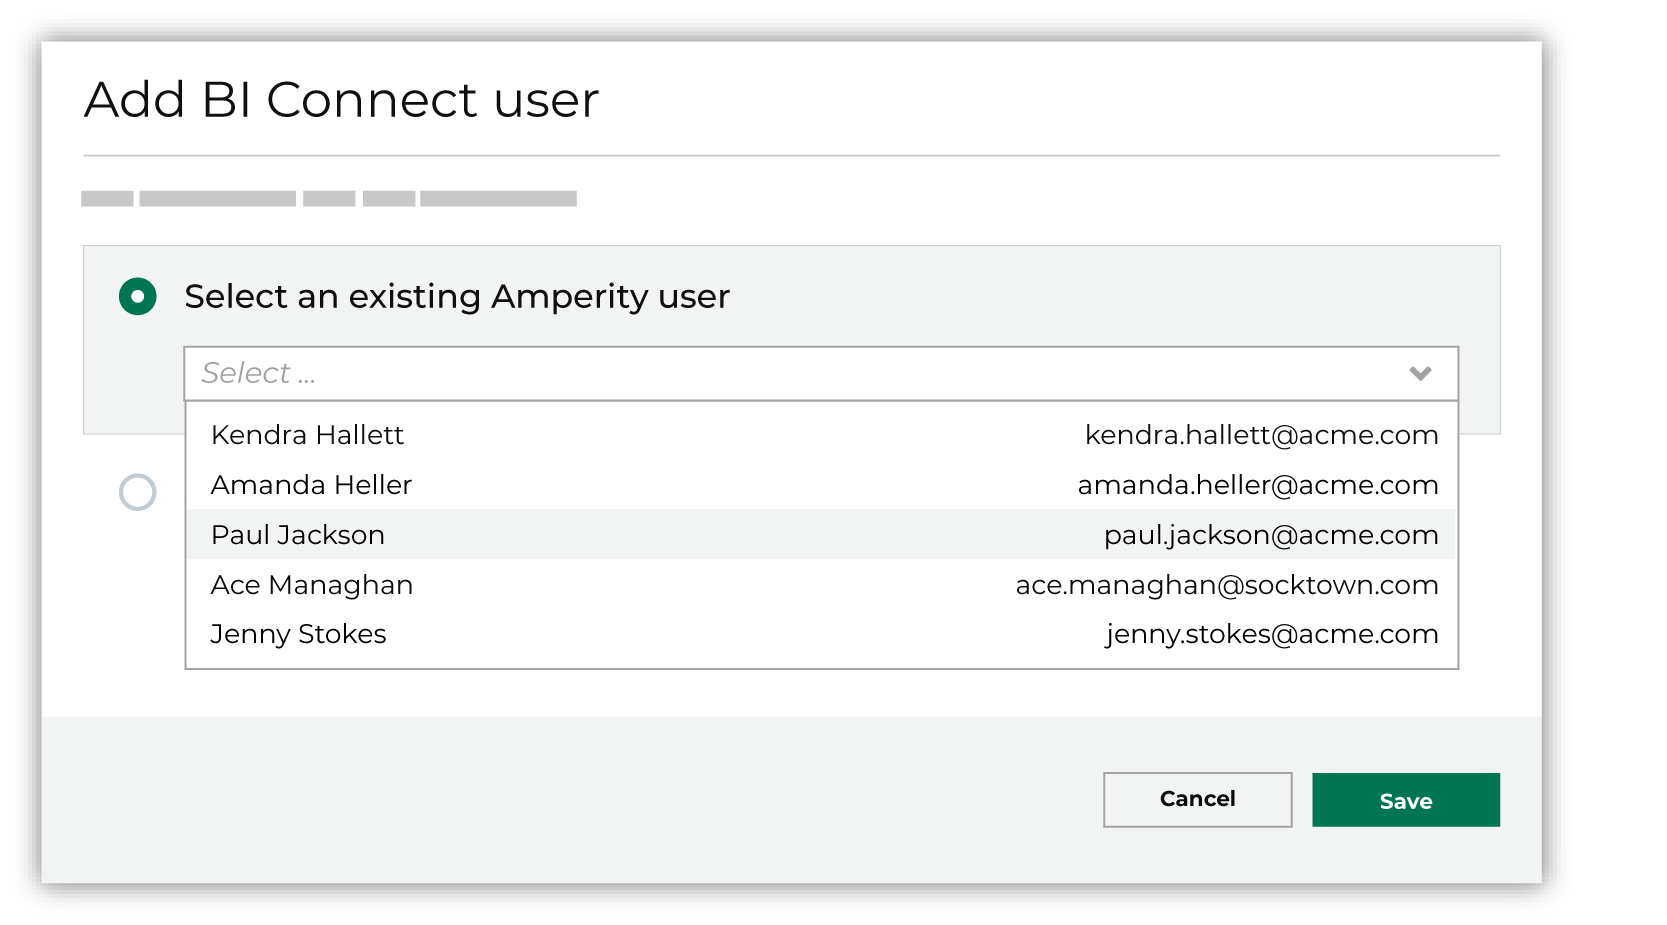 Add existing Amperity users to BI Connect.